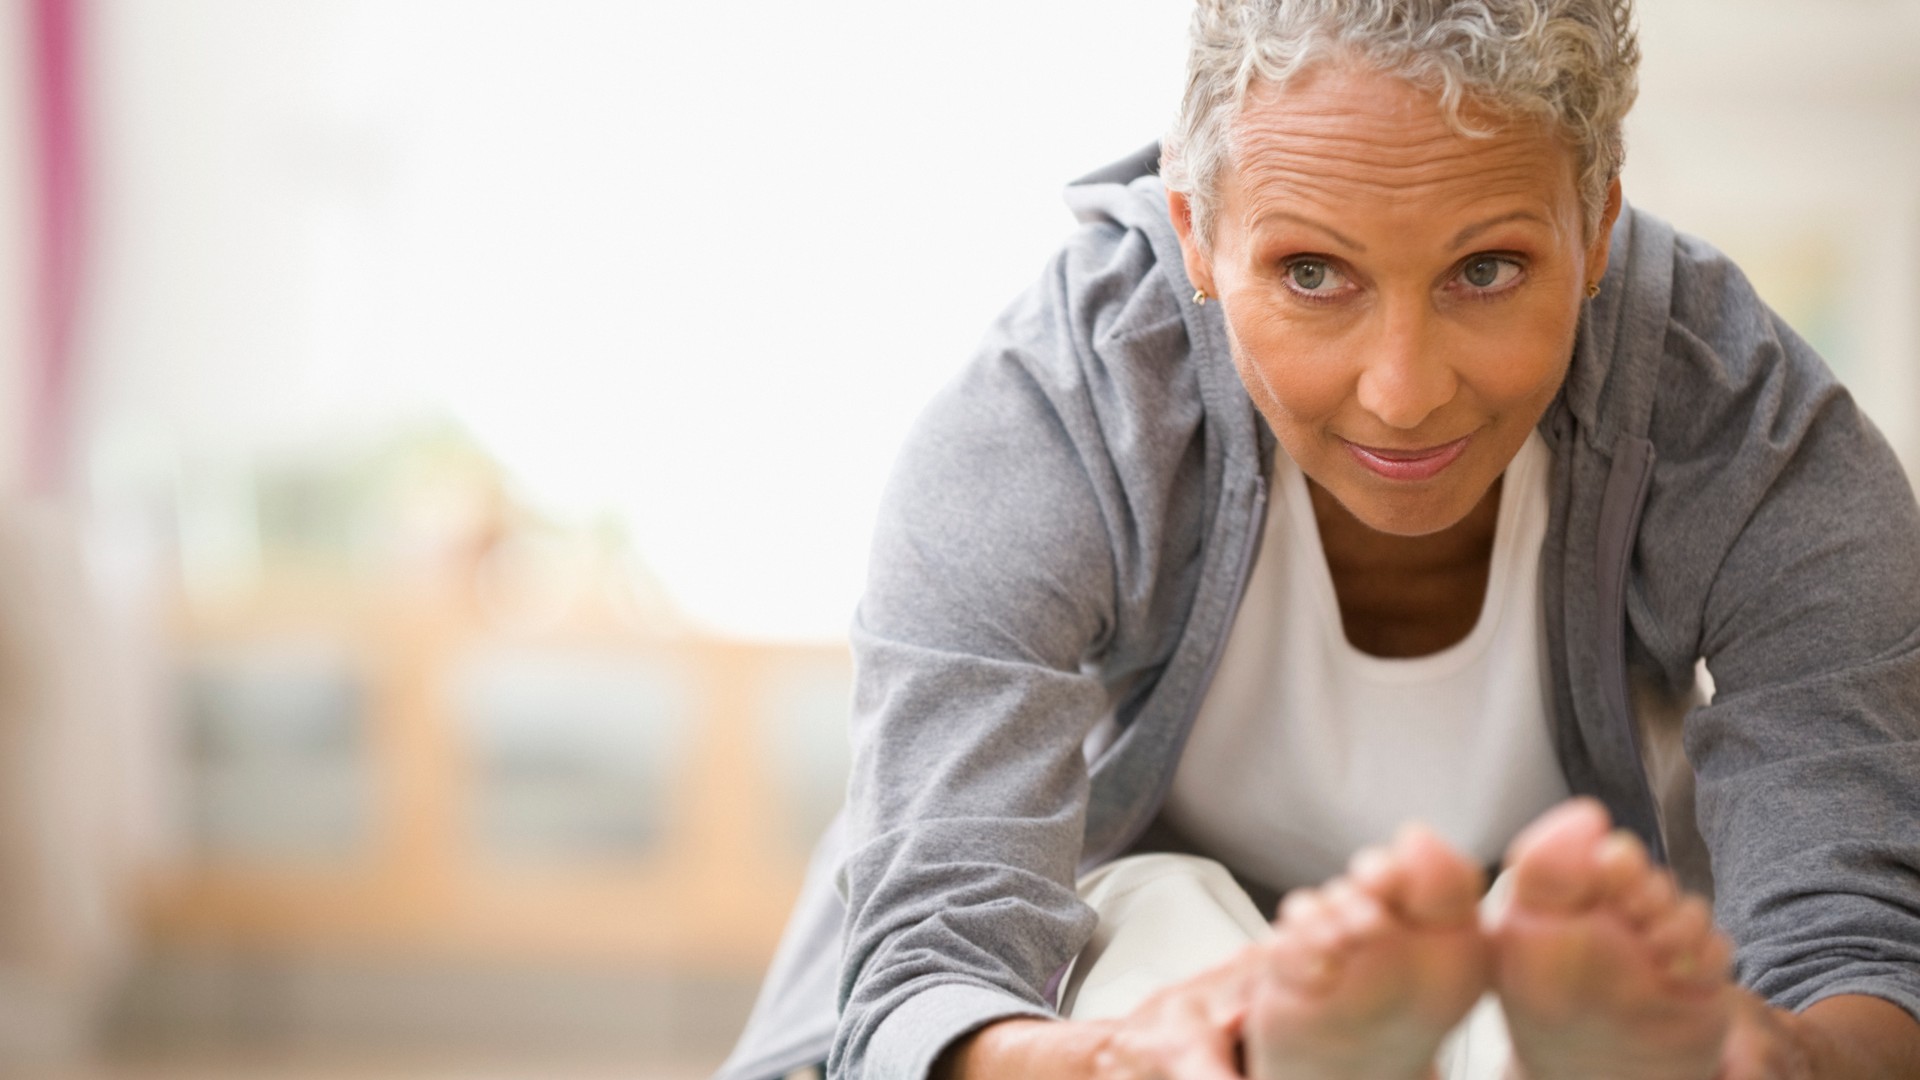 Punching Things And Other Great Workouts for Menopause